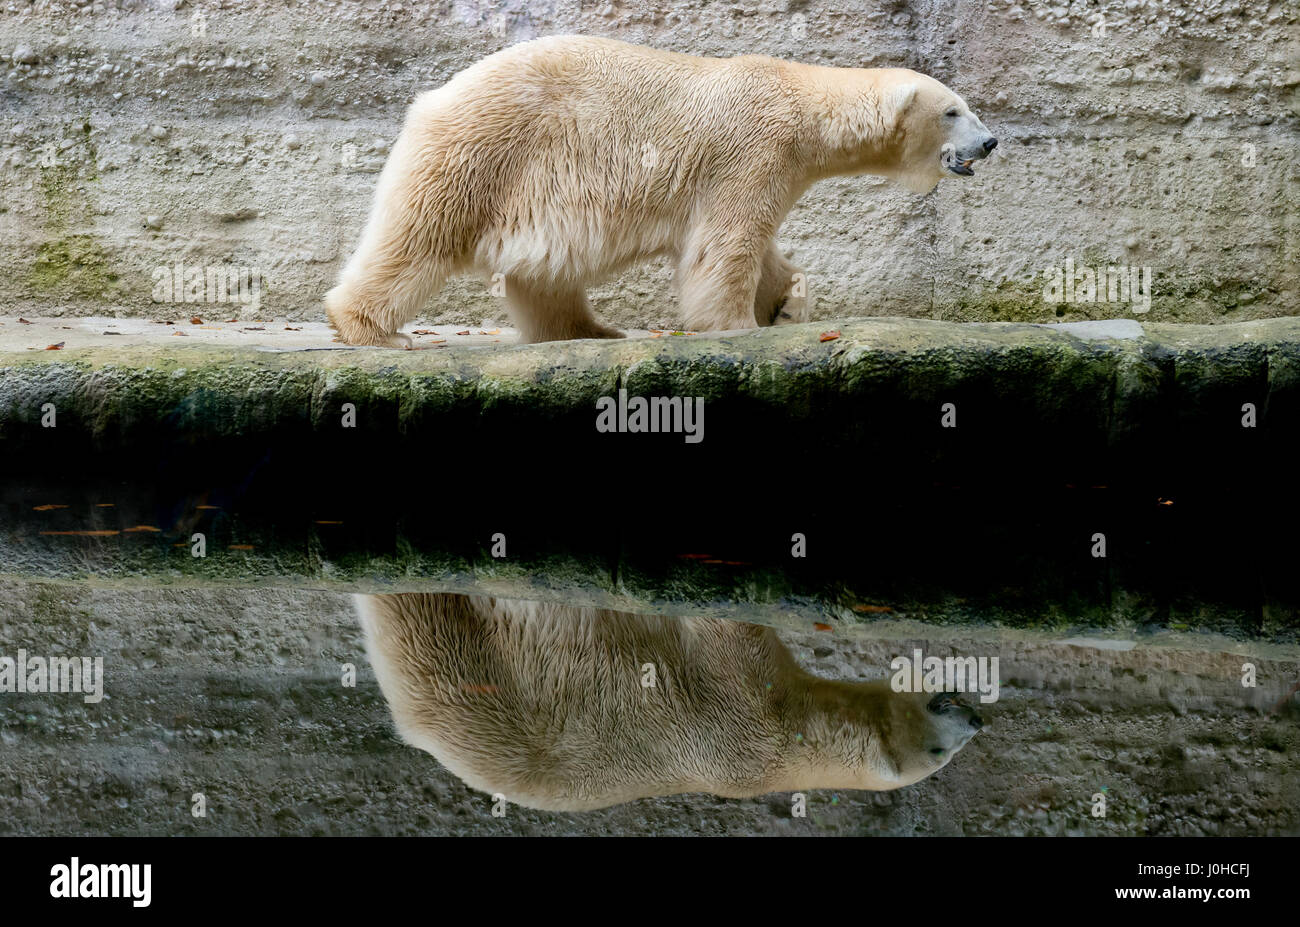 Munich, Germany. 07th Nov, 2014. (FILE) · An archive picture, dated 07.11.2014, shows the polar bear "Yoghi" walking in its enclosement at the Hellabrunn Zoo in Munich, Germany. According to an announcement made by the Zoo on Good Friday, Yoghi met an untimely death on 13 April 2017. (from dpa's "Yoghi the polar bear dies" from 14 April 2017) Photo: Sven Hoppe/dpa/Alamy Live News Stock Photo